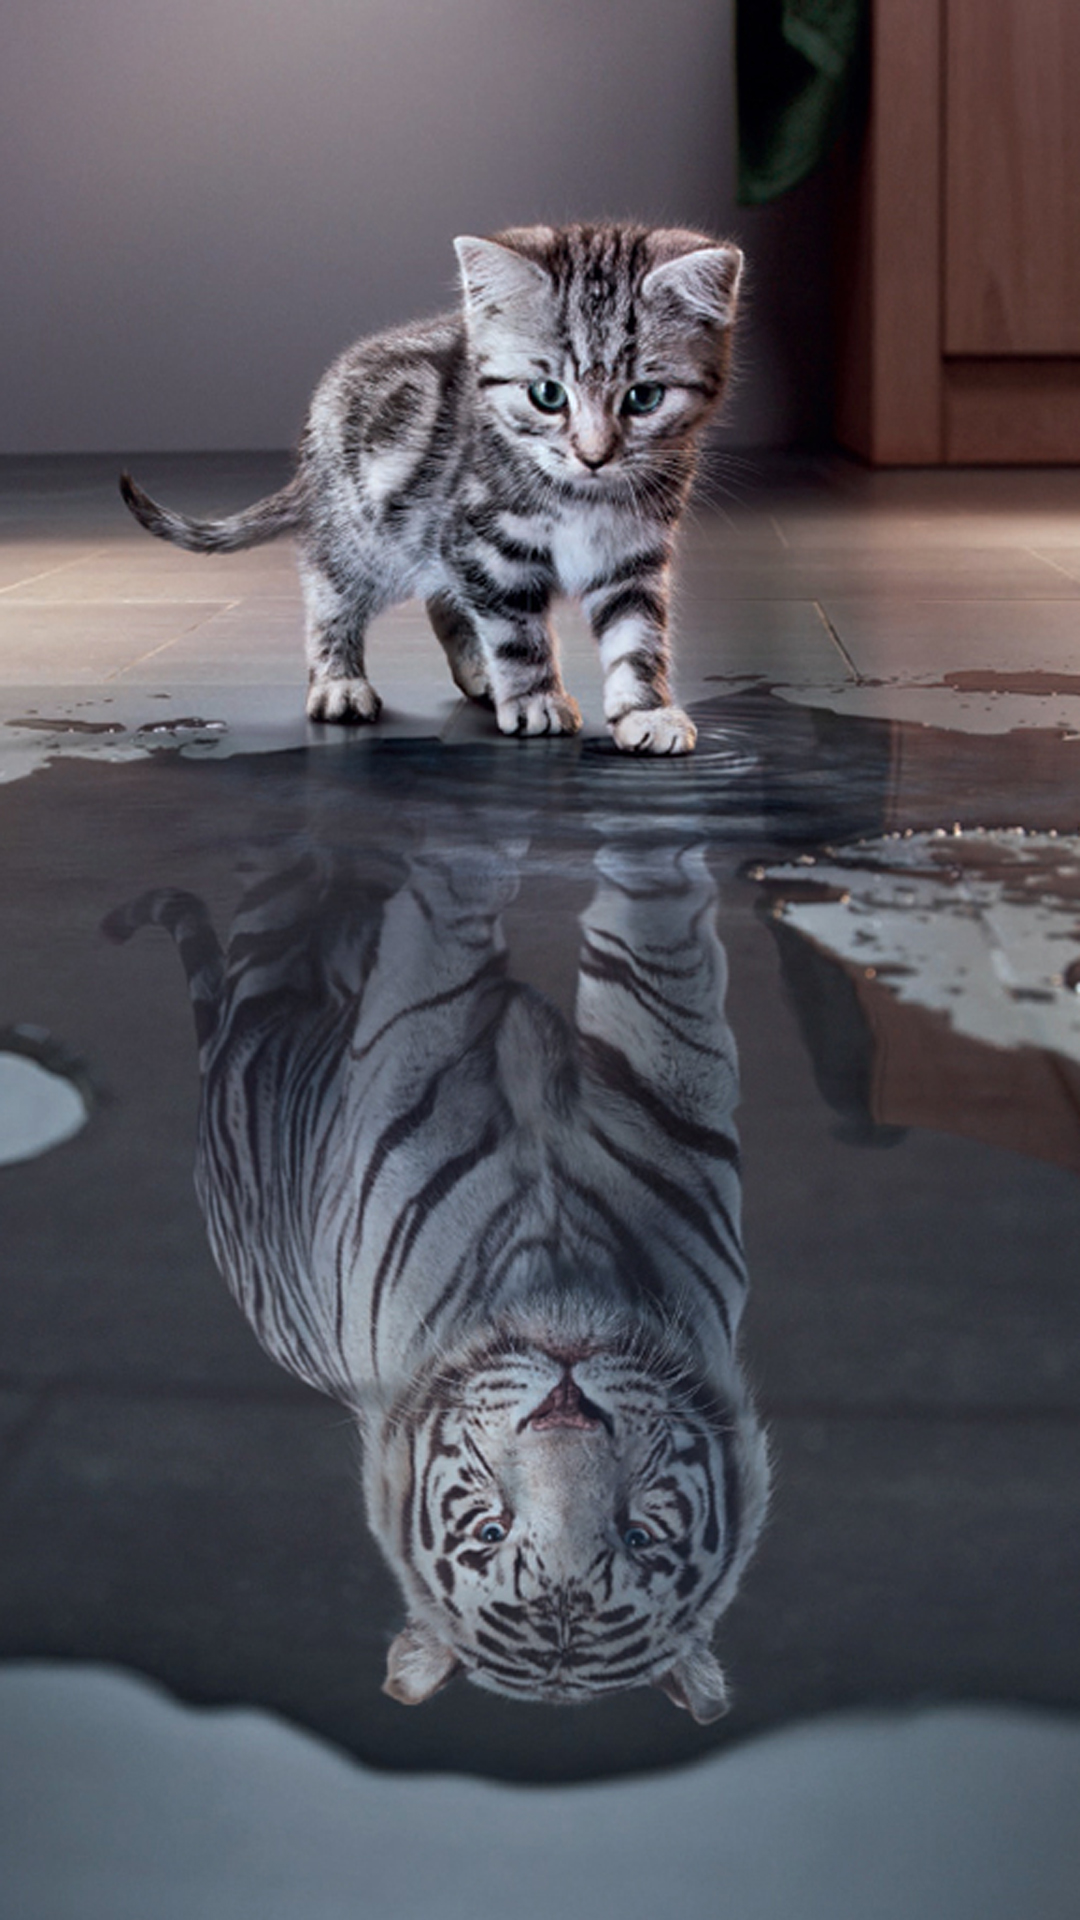 white tiger, kitten, animal, cat, reflection, puddle, cats Full HD